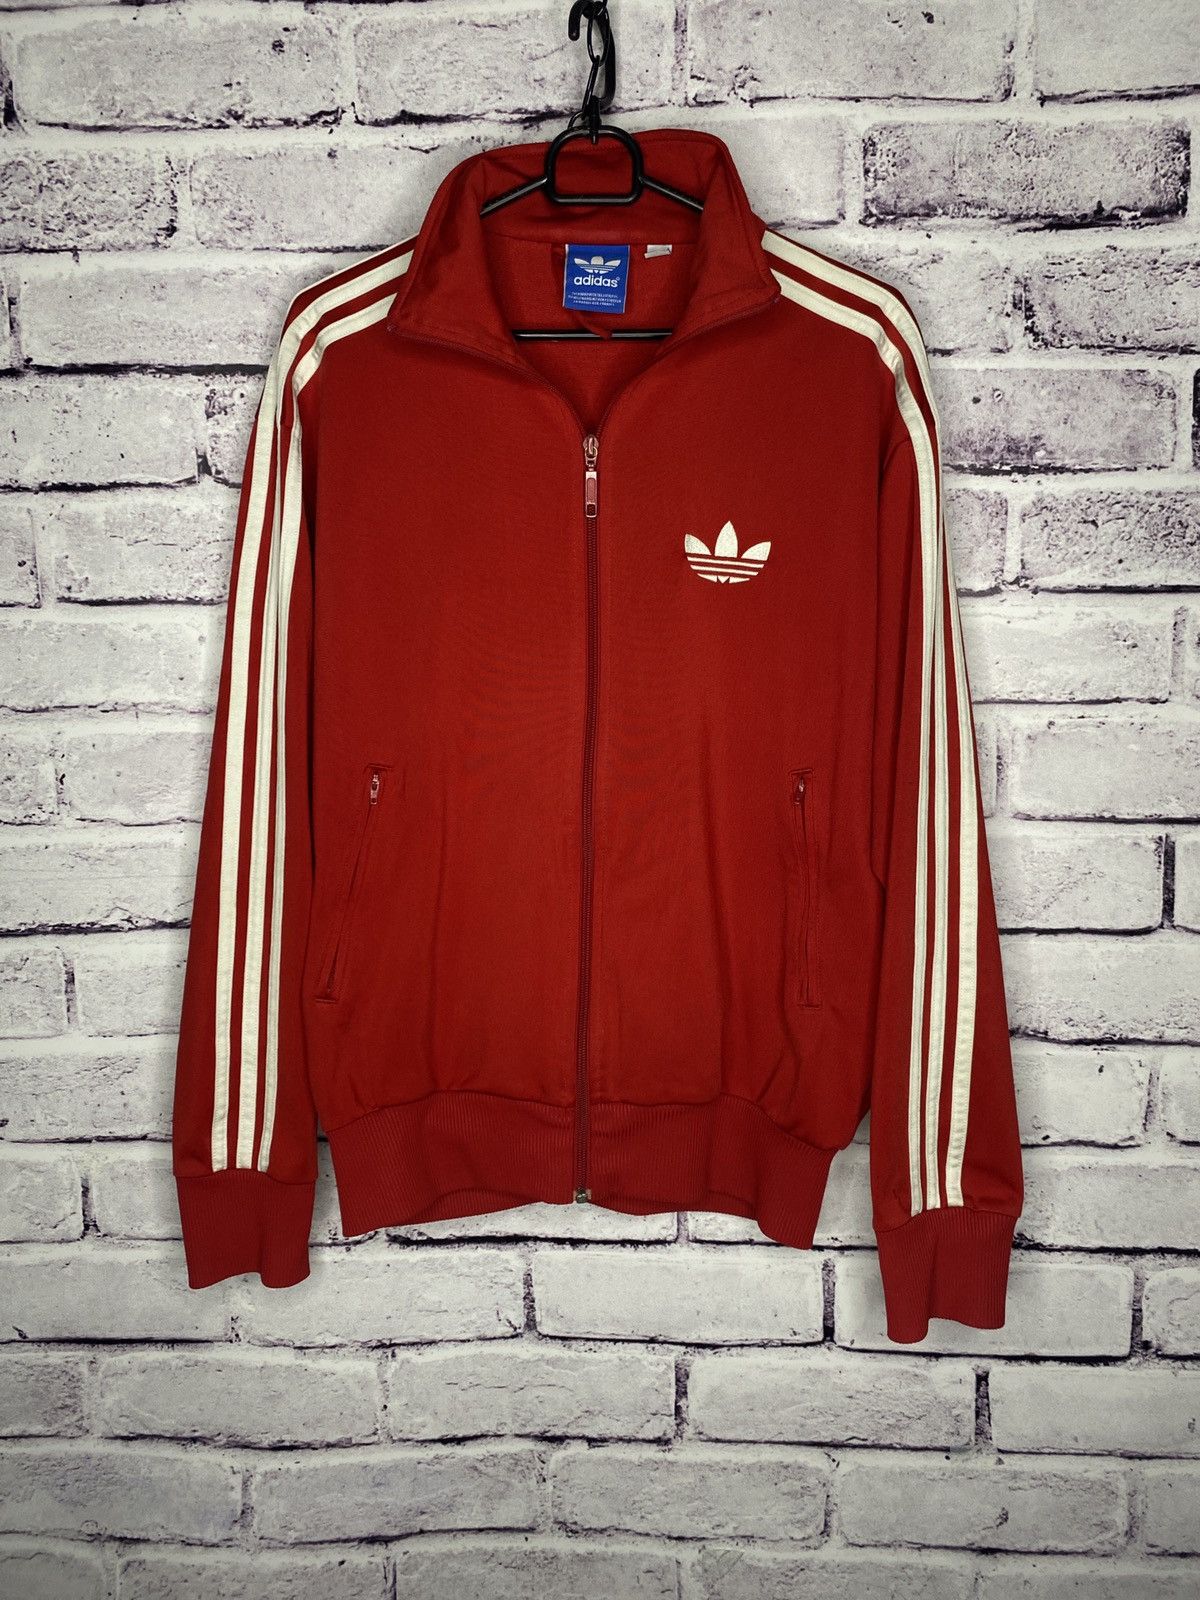 Pre-owned Adidas X Vintage Adidas Firebird Track Top Jacket Original Trefoil Logo In Red